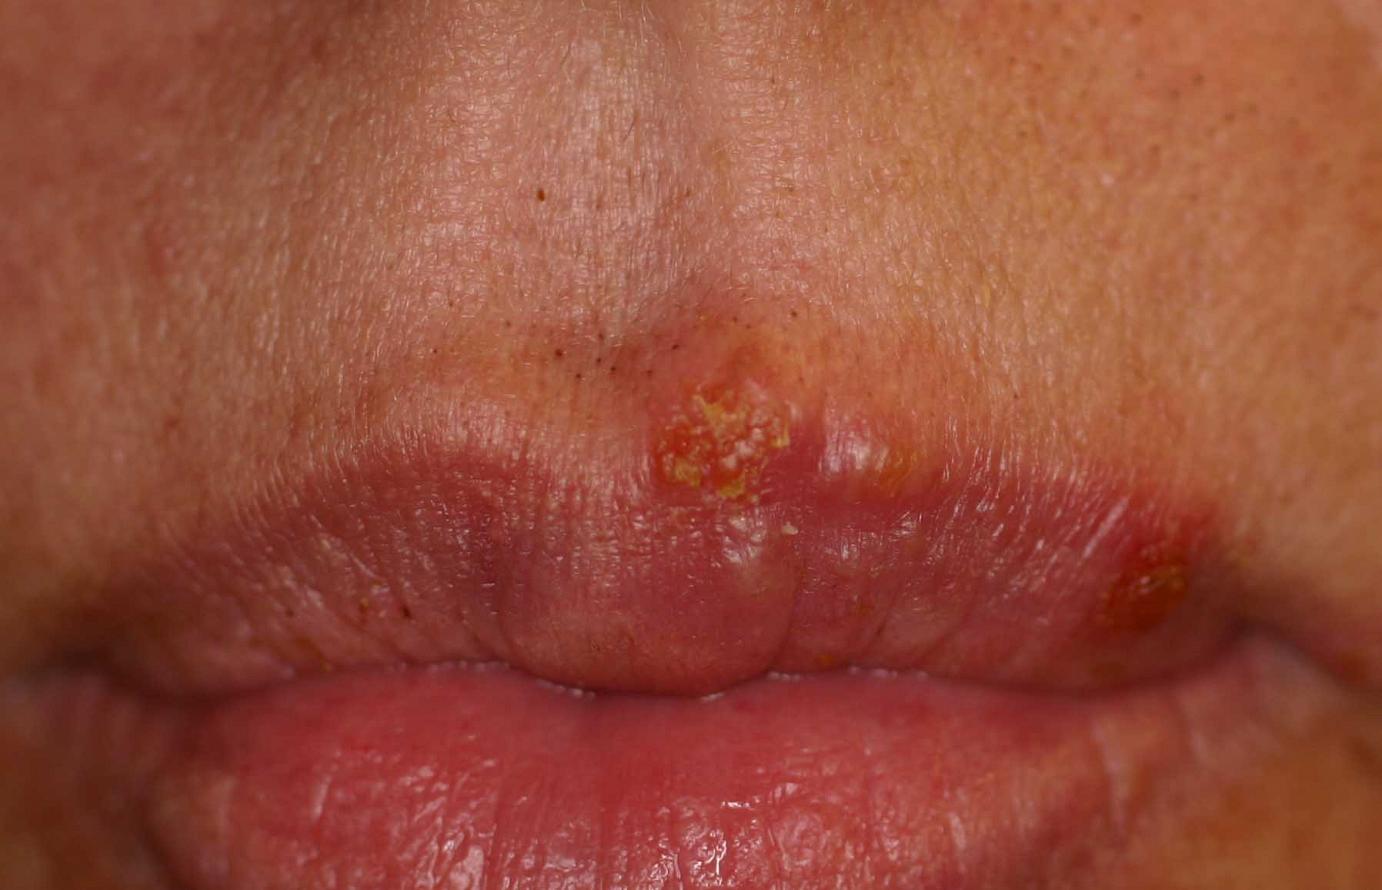 Herpes Zoster Herbal Treatment : Theres Still Hope Behind Incurable Stds